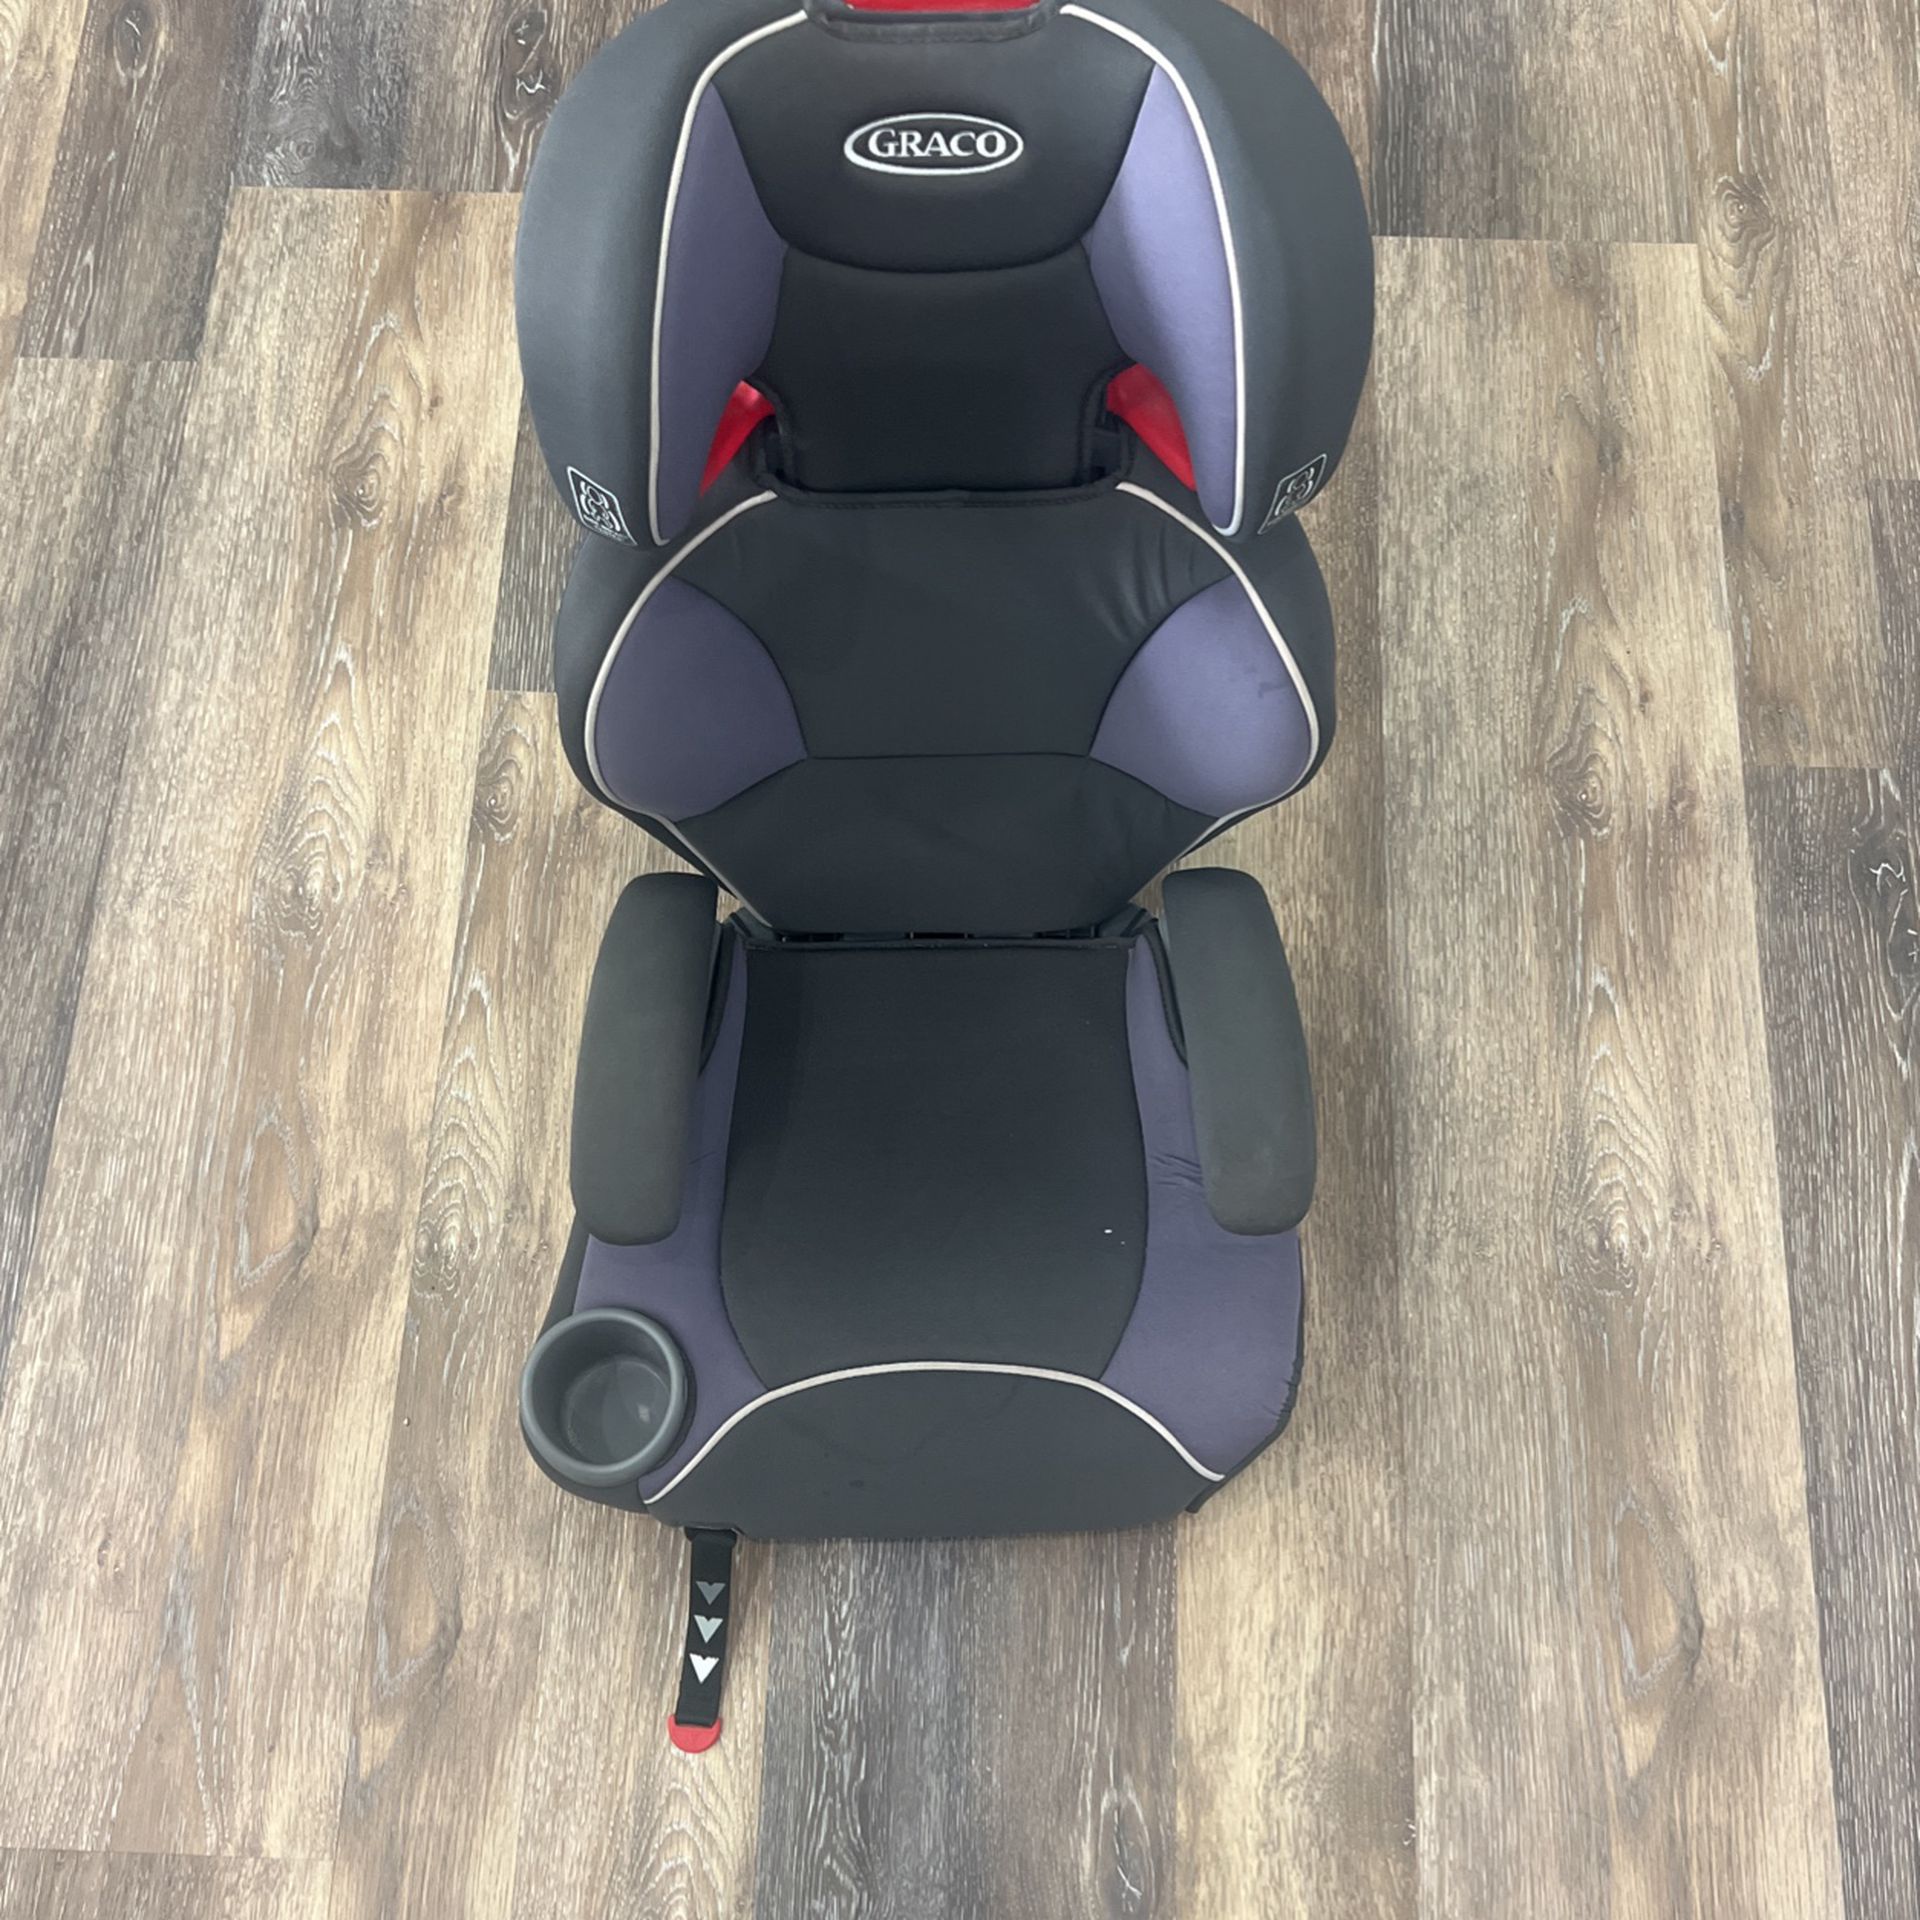 Graco Child Car Seat/booster